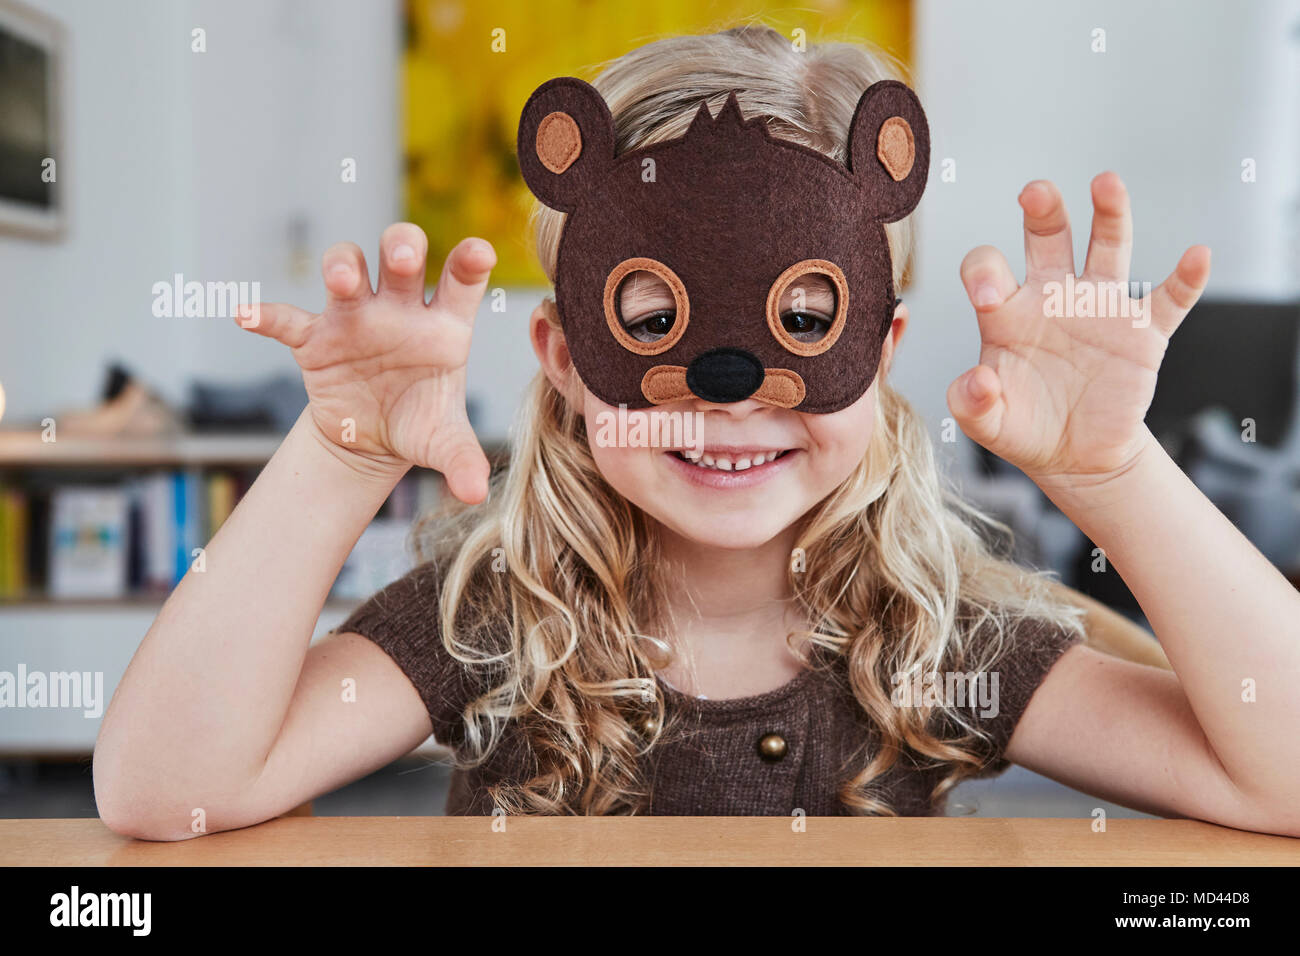 Portrait of young girl wearing bear mask Stock Photo